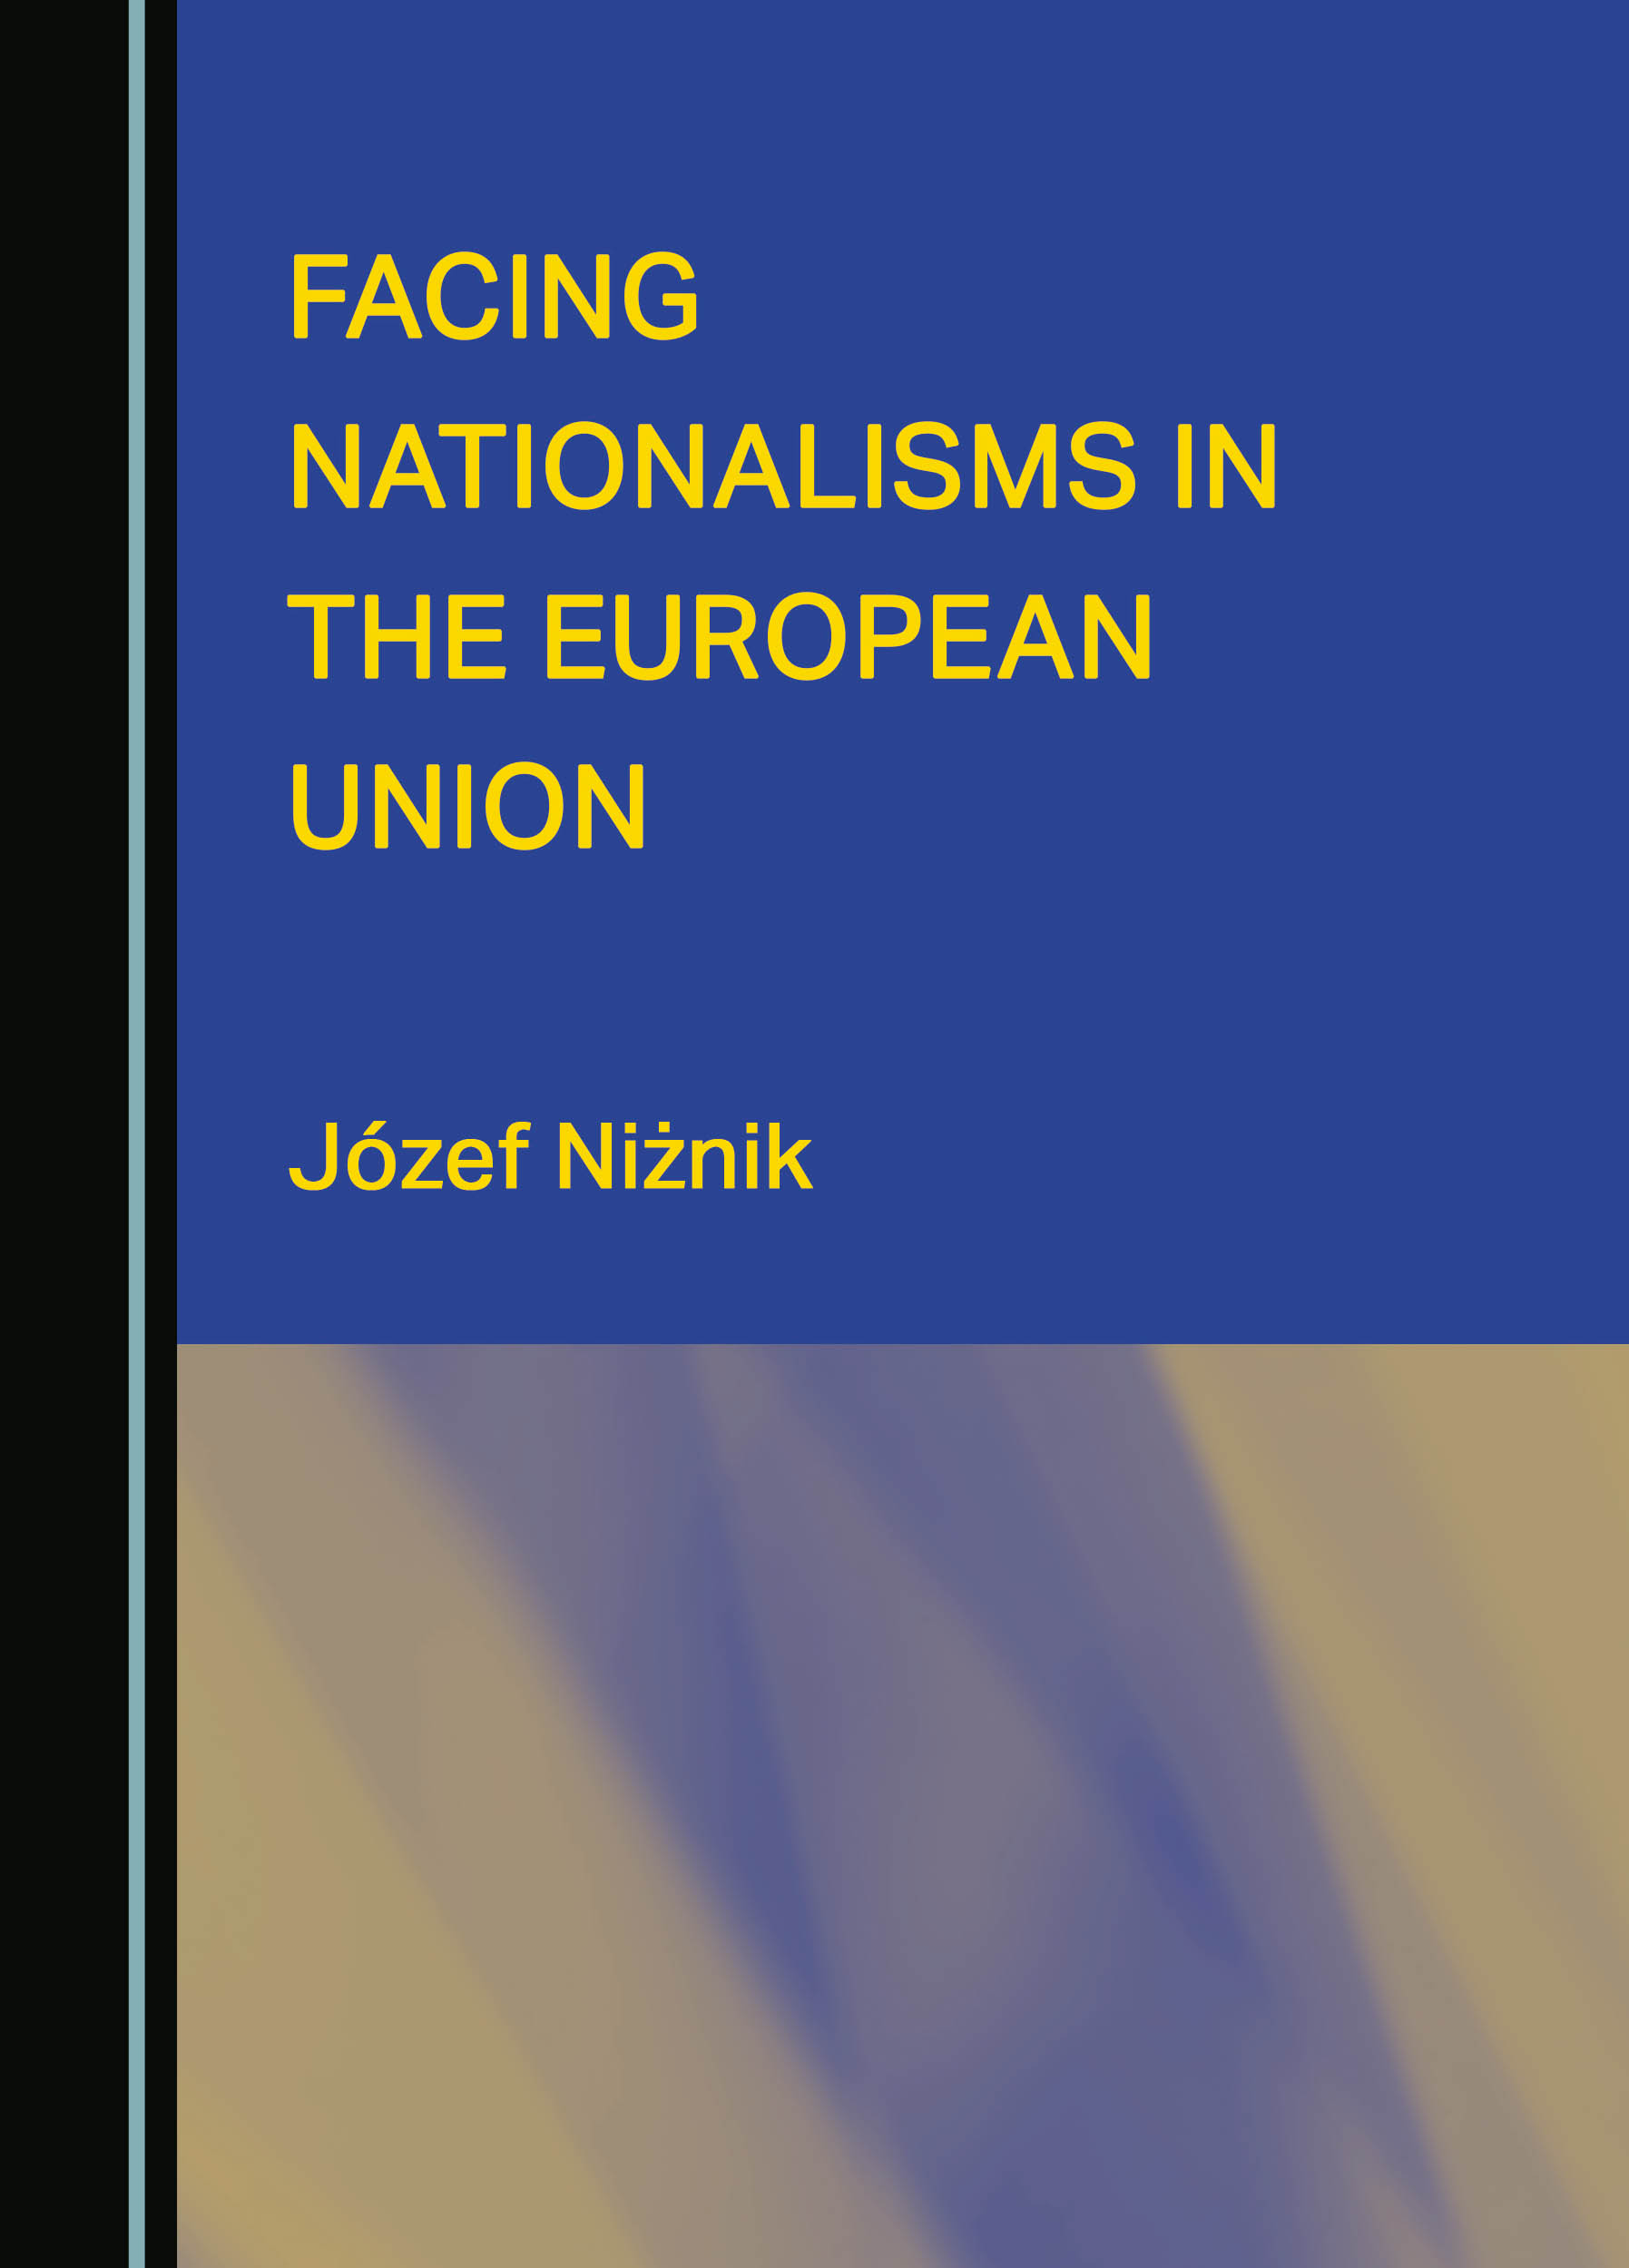 Facing nationalisms in the European Union. 9781527529847